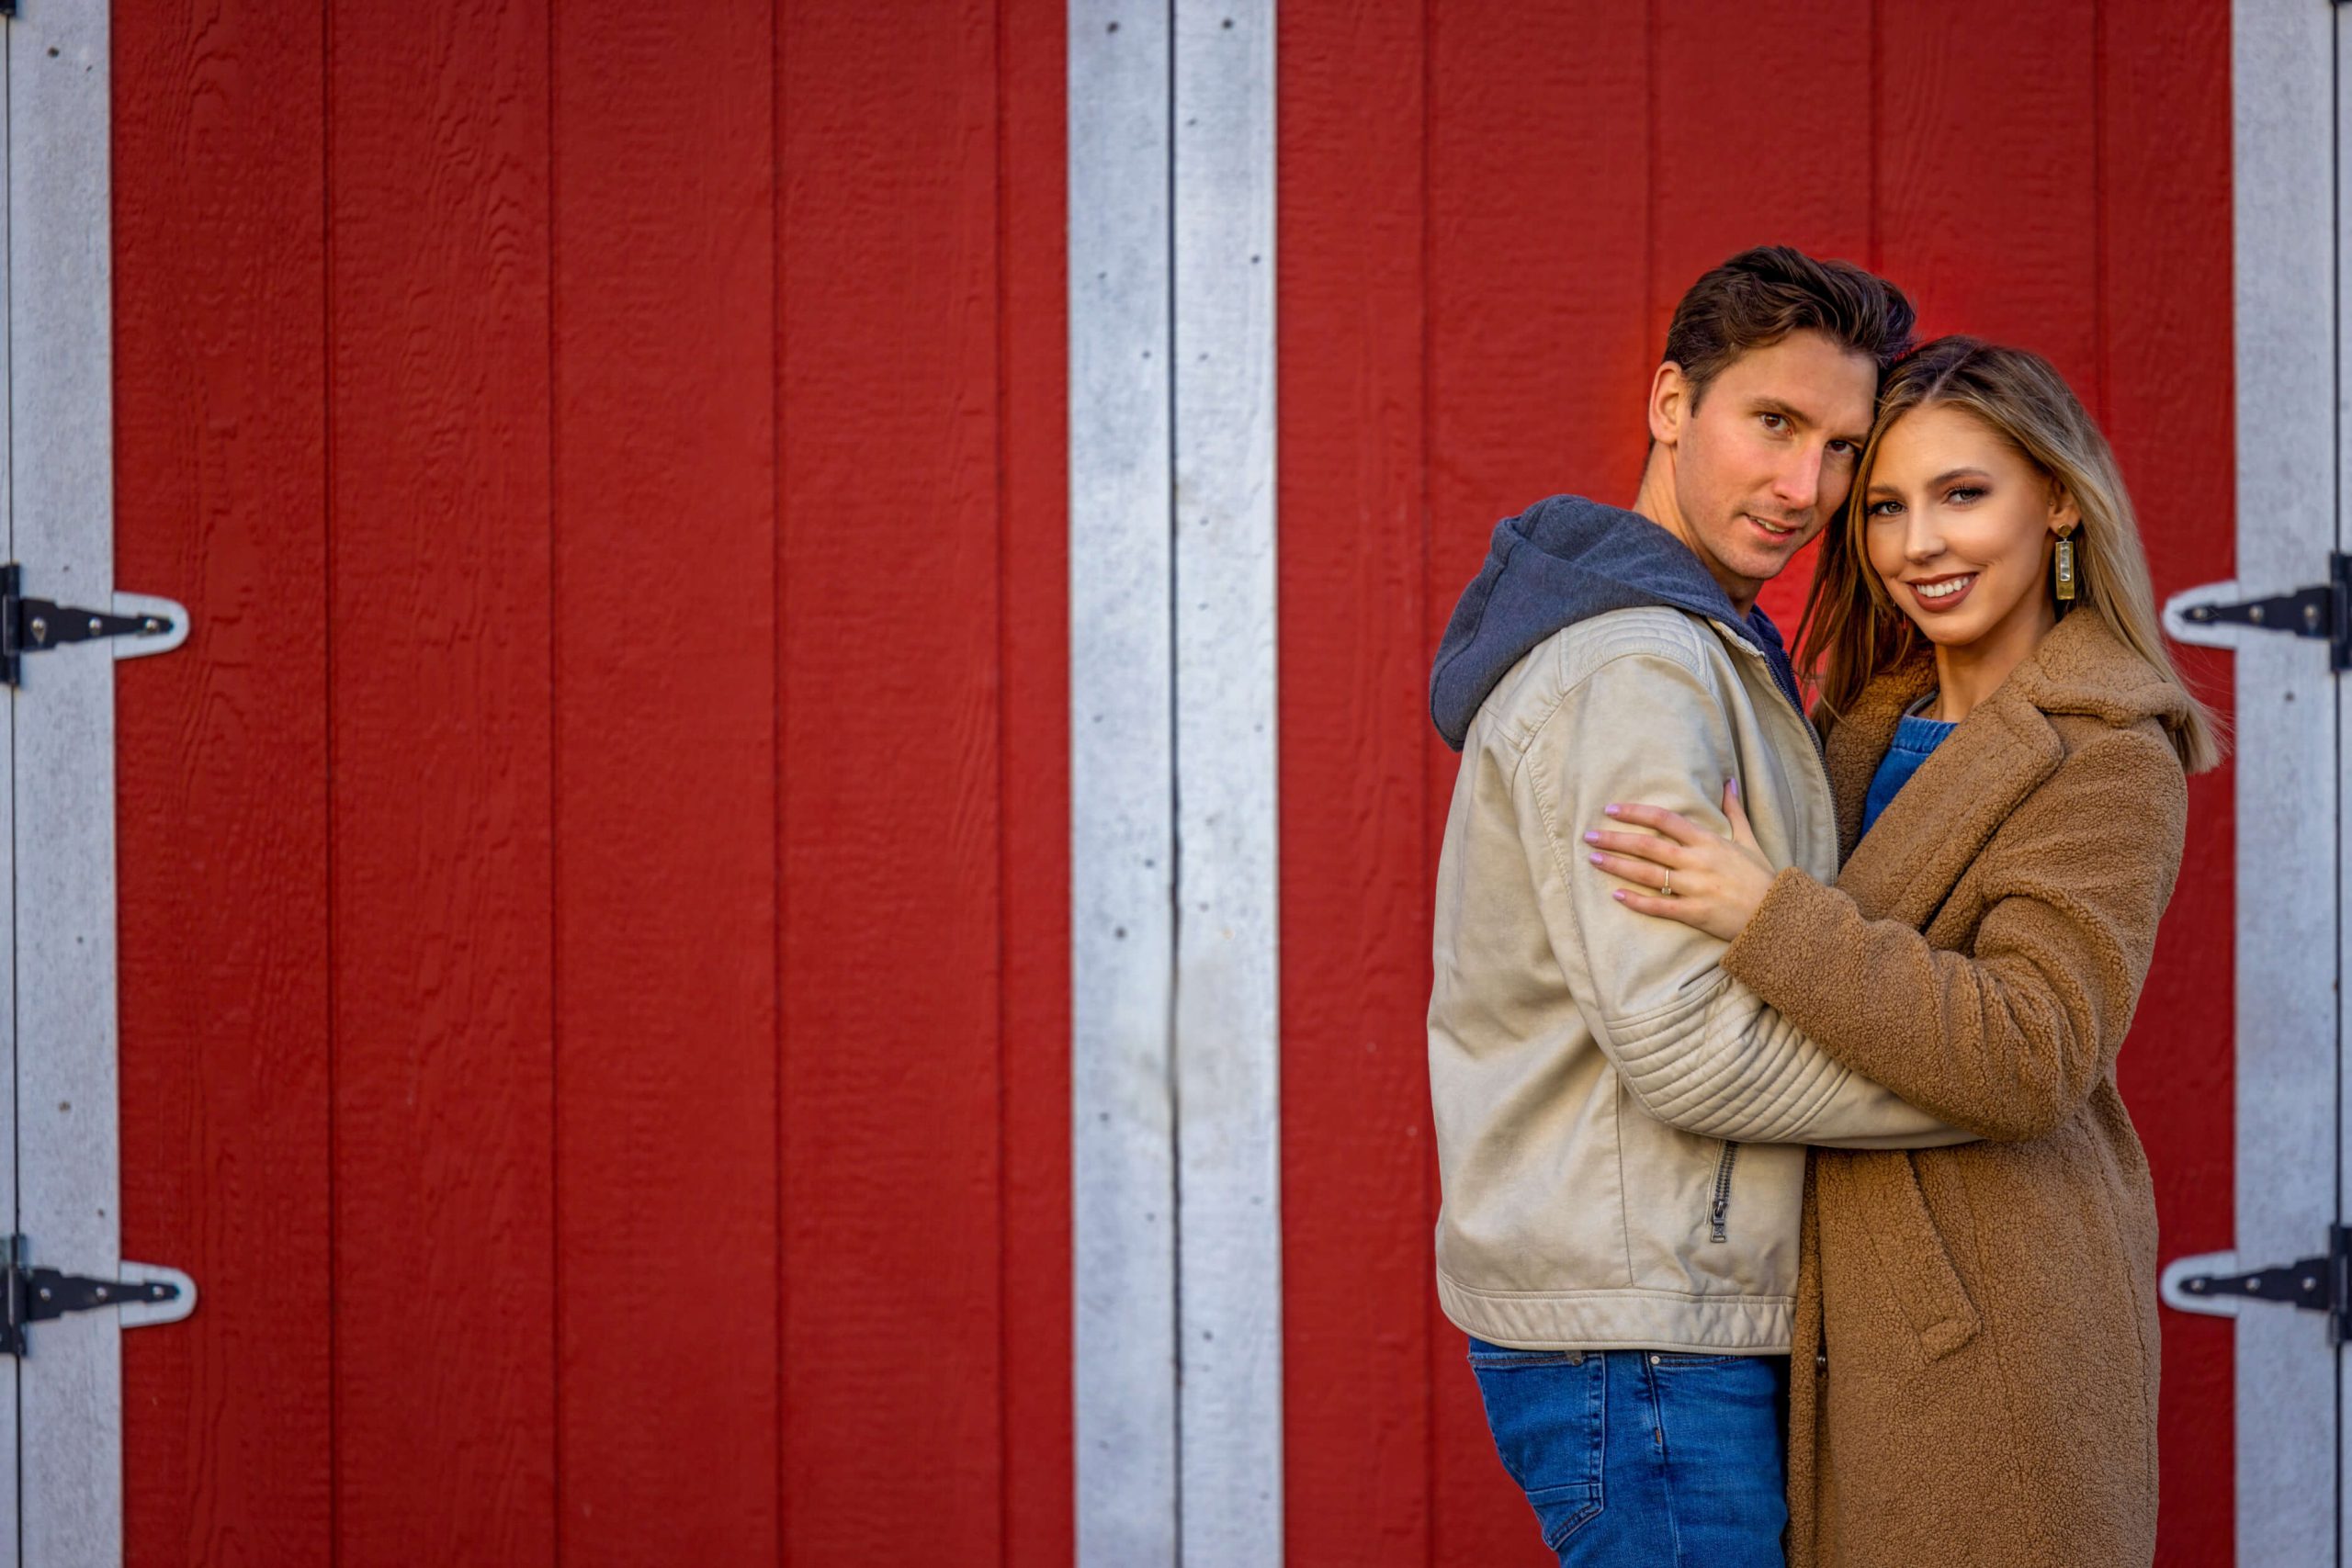 engagement photo against a red shed